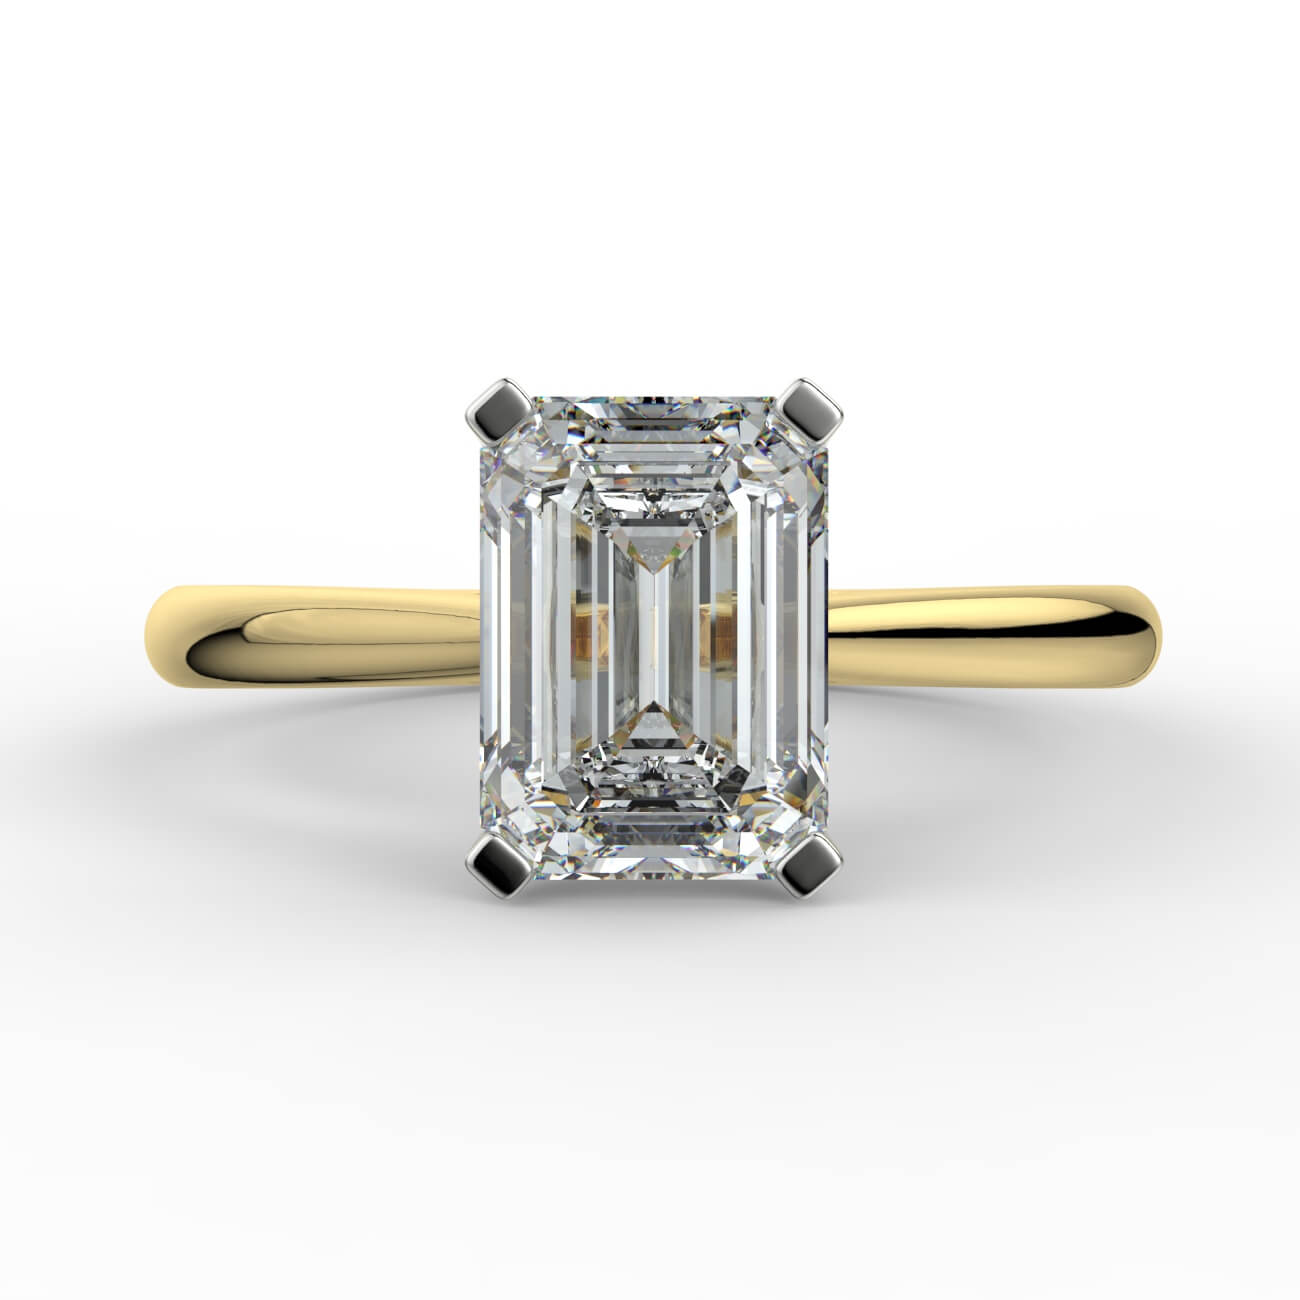 Emerald cut diamond cathedral engagement ring in yellow and white gold – Australian Diamond Network